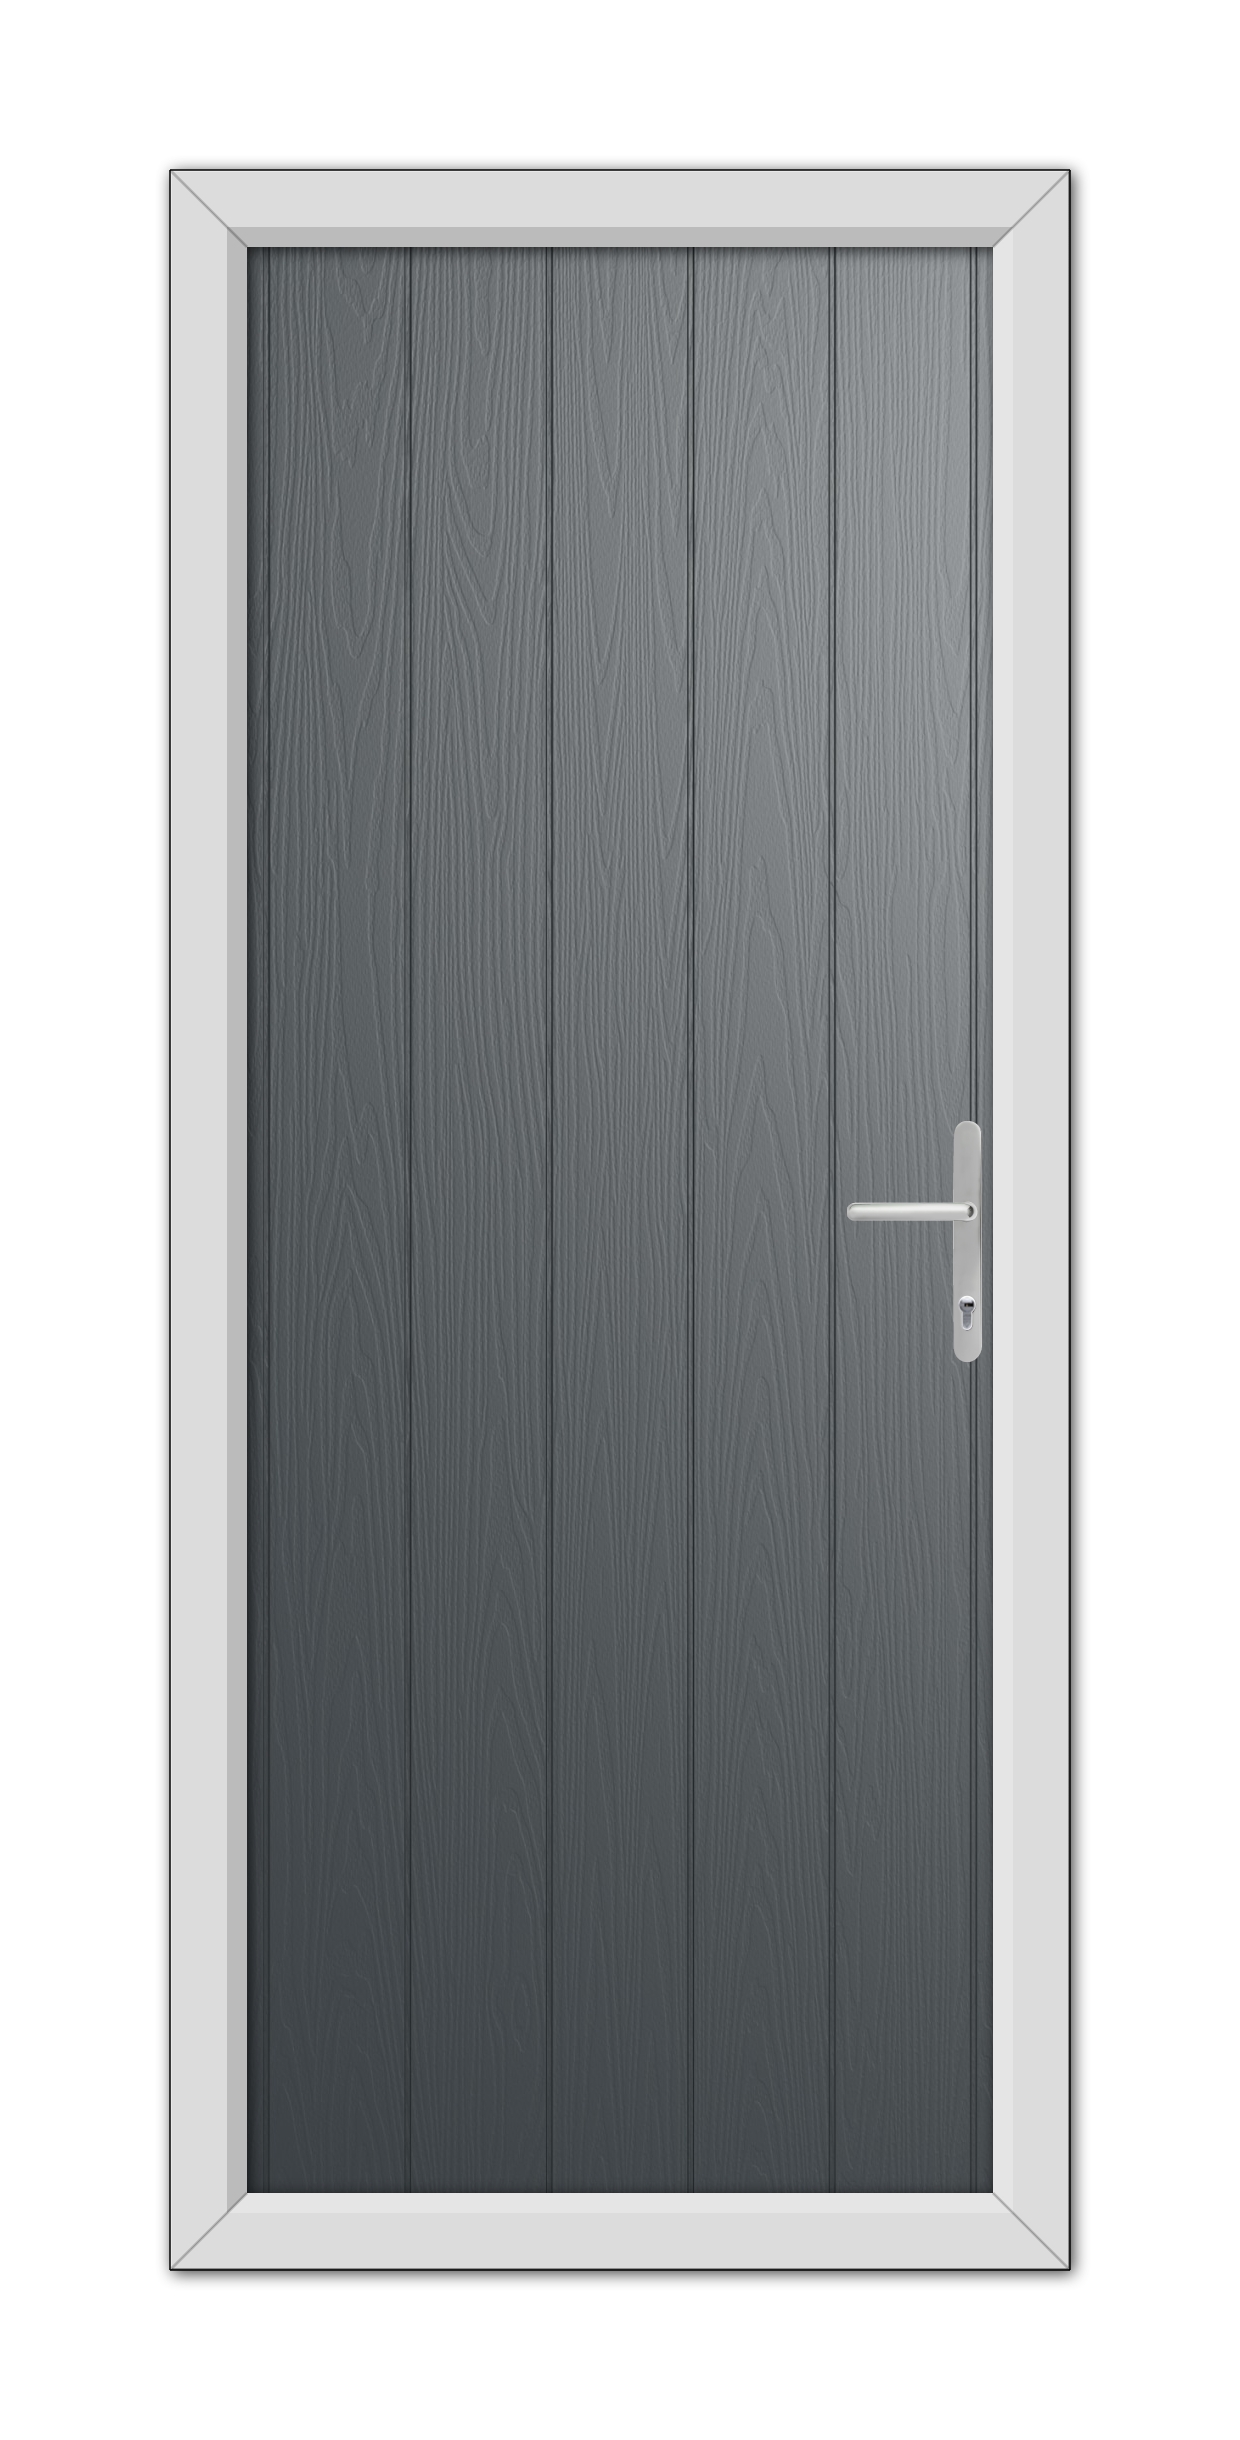 A Anthracite Grey Gloucester Composite door with a silver handle, framed within a white door frame, set against a plain white background.